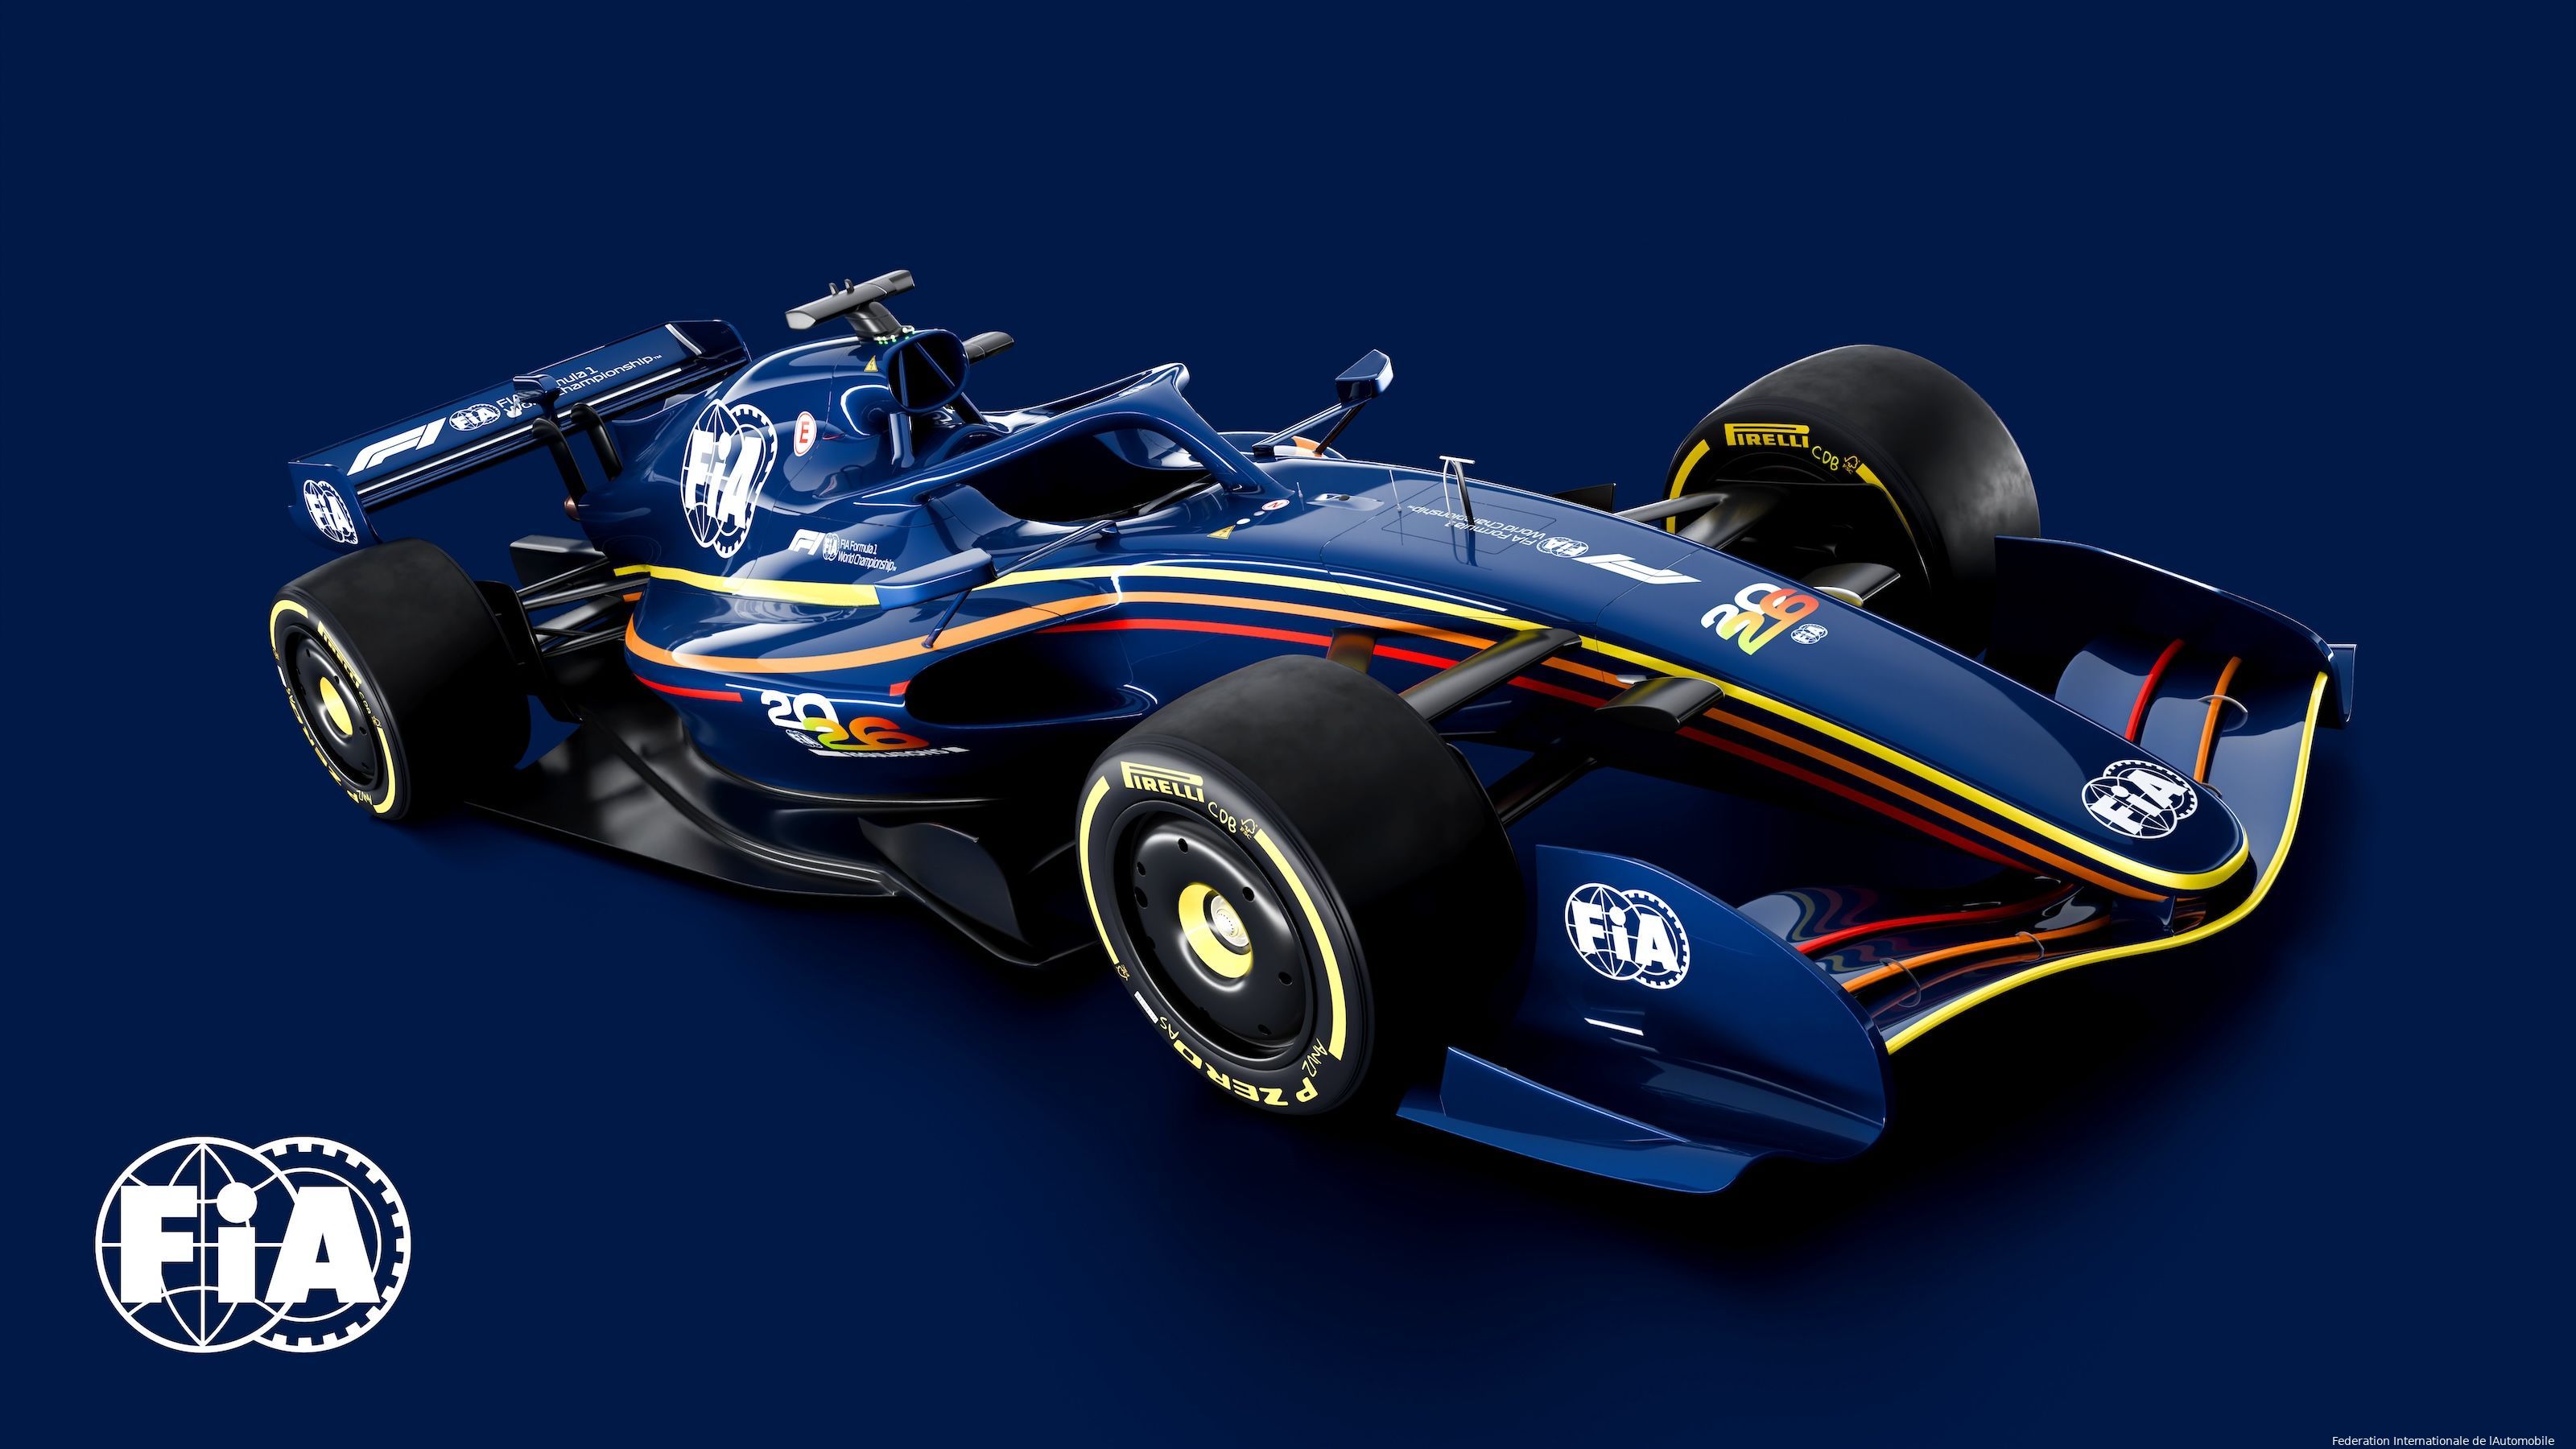 FIA's Render of the 2026 car concept